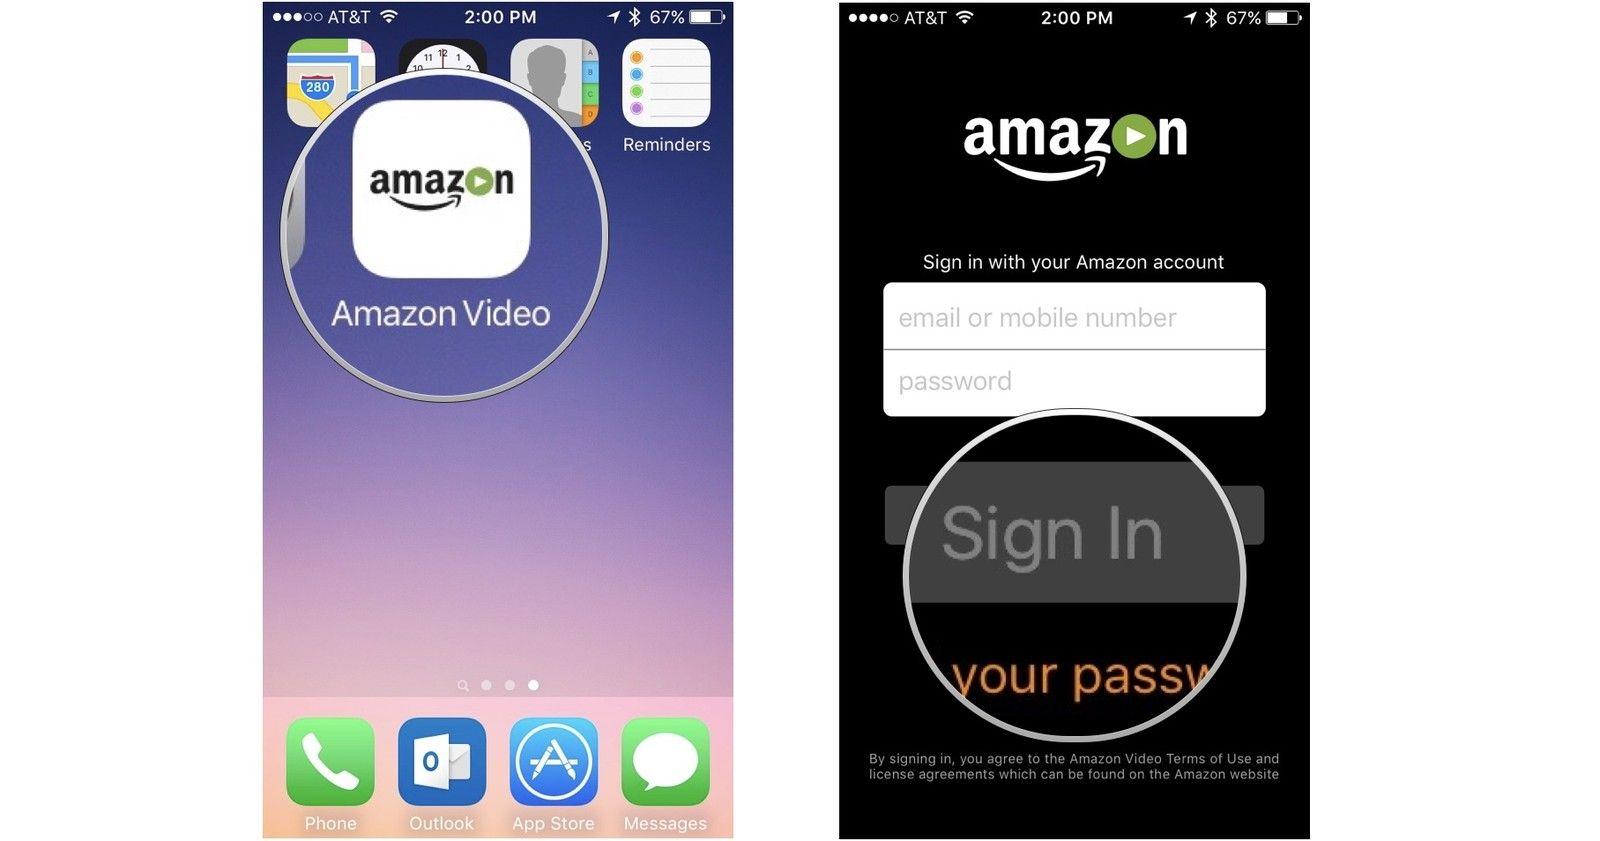 Amazon iPhone App Logo - How to watch Amazon Prime videos on iPhone and iPad | iMore